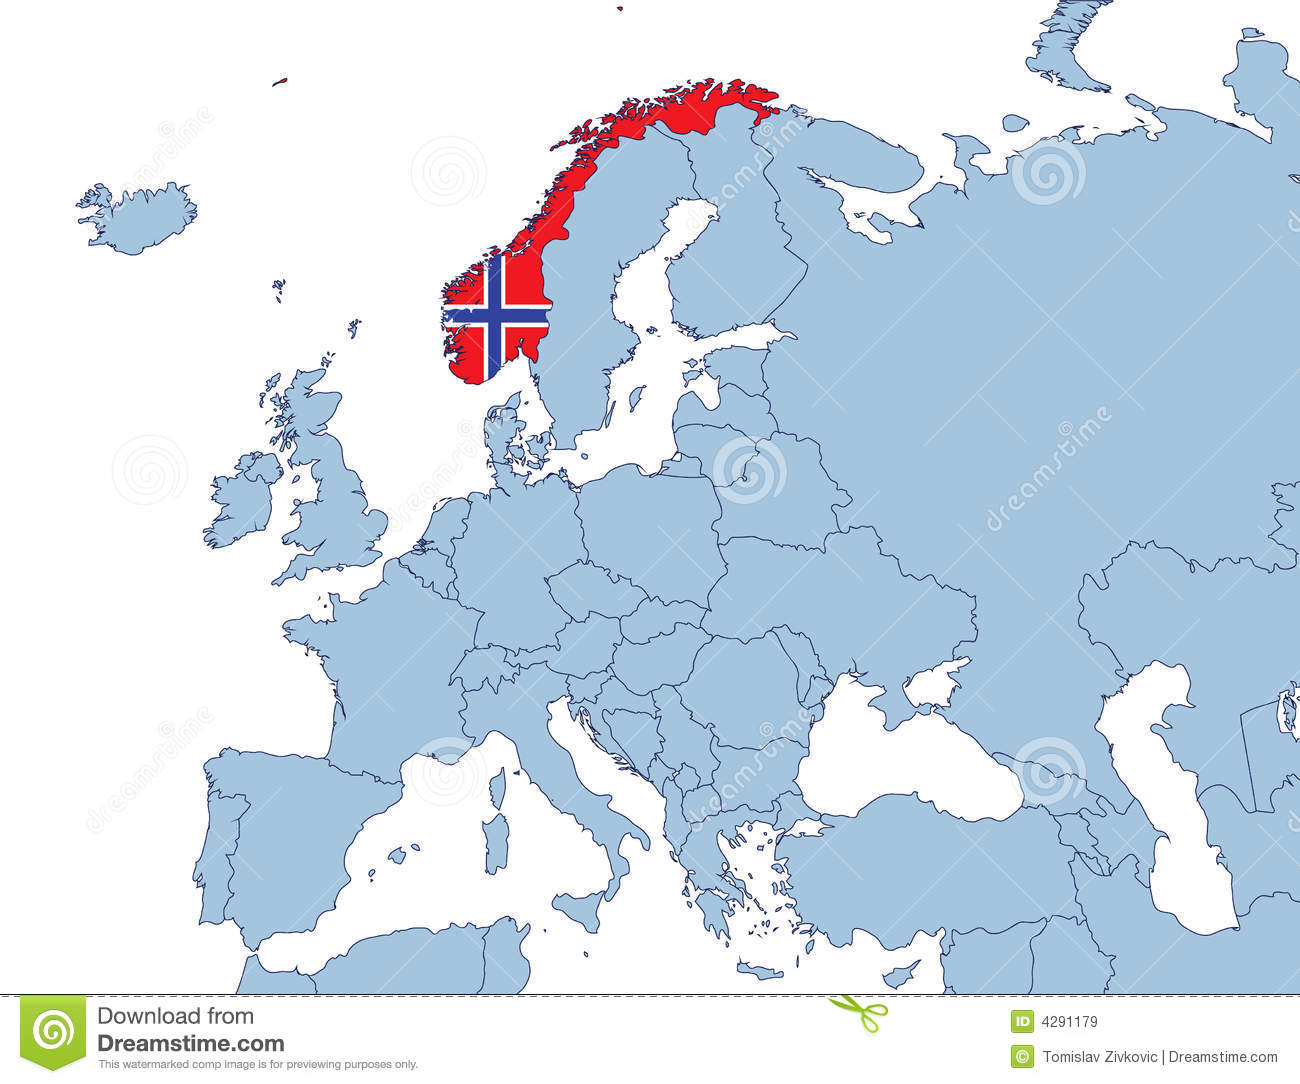 Royalty Free Stock Images  Norway On Europe Map